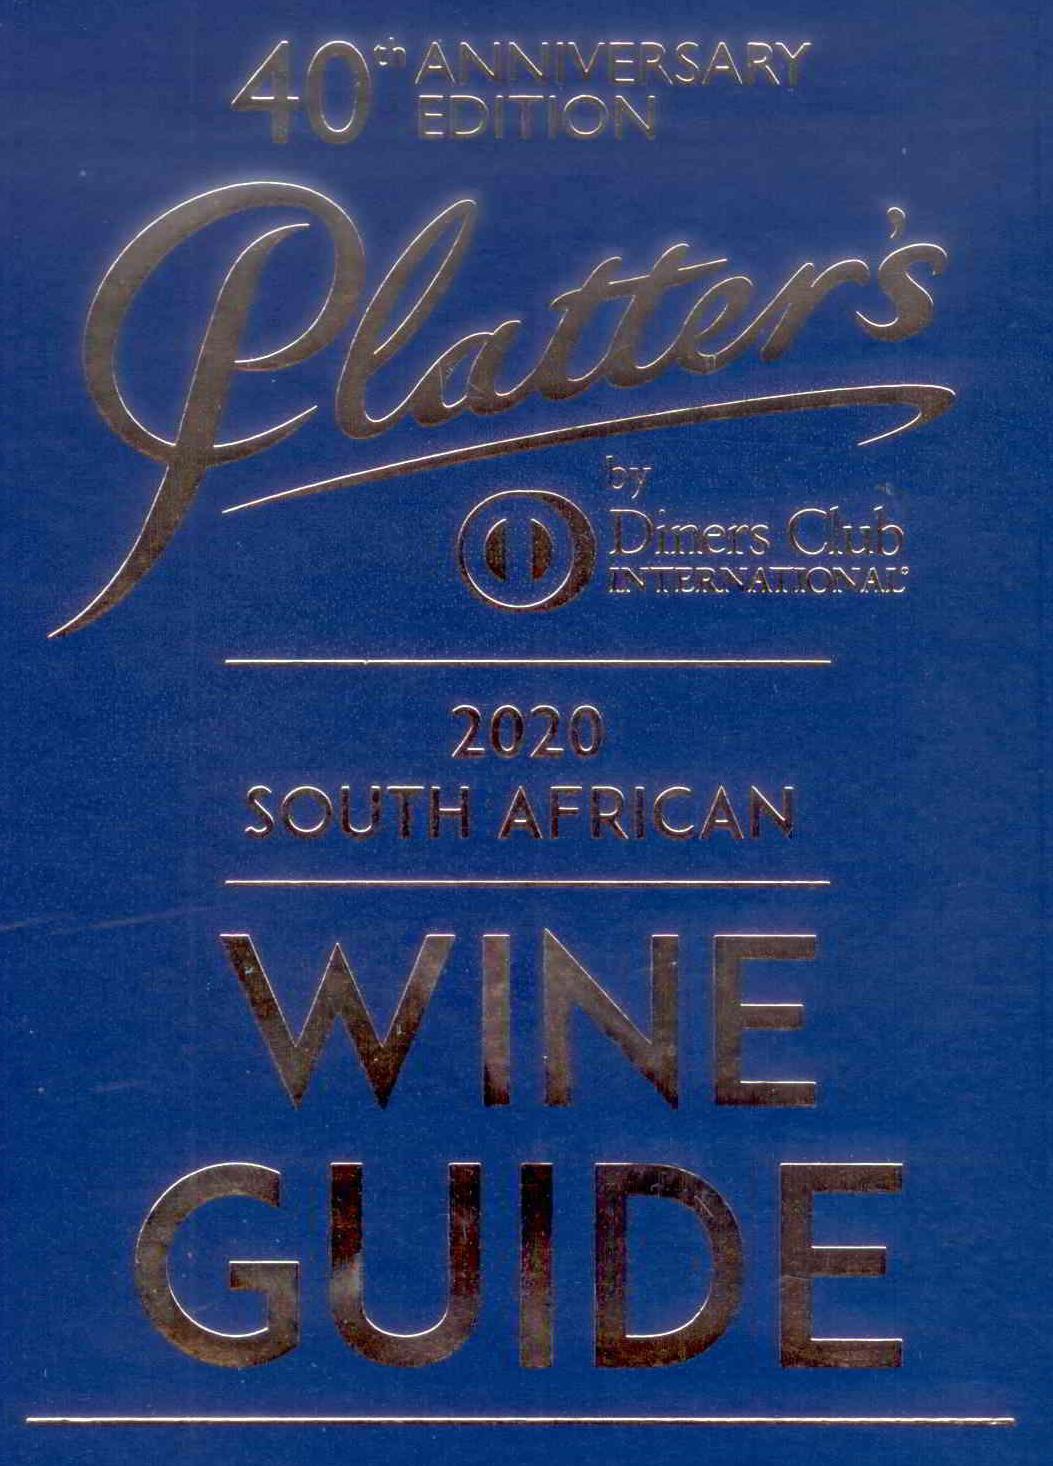 John Platter 2020 recommends Percy Tours, Hermanus, near Cape Town, South Africa